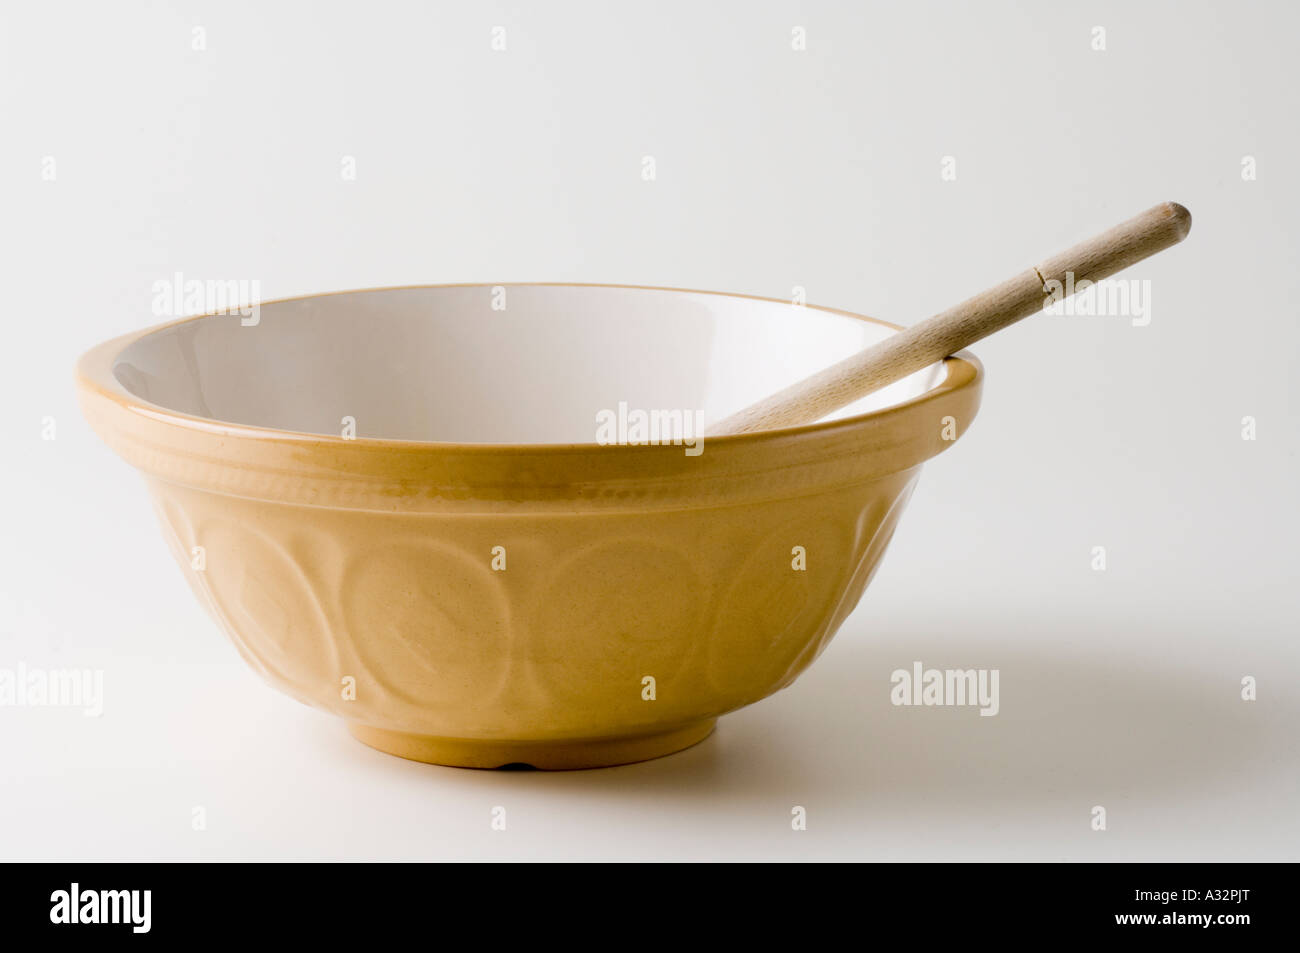 Empty Mixing Bowl With Wooden Spoon Stock Photo